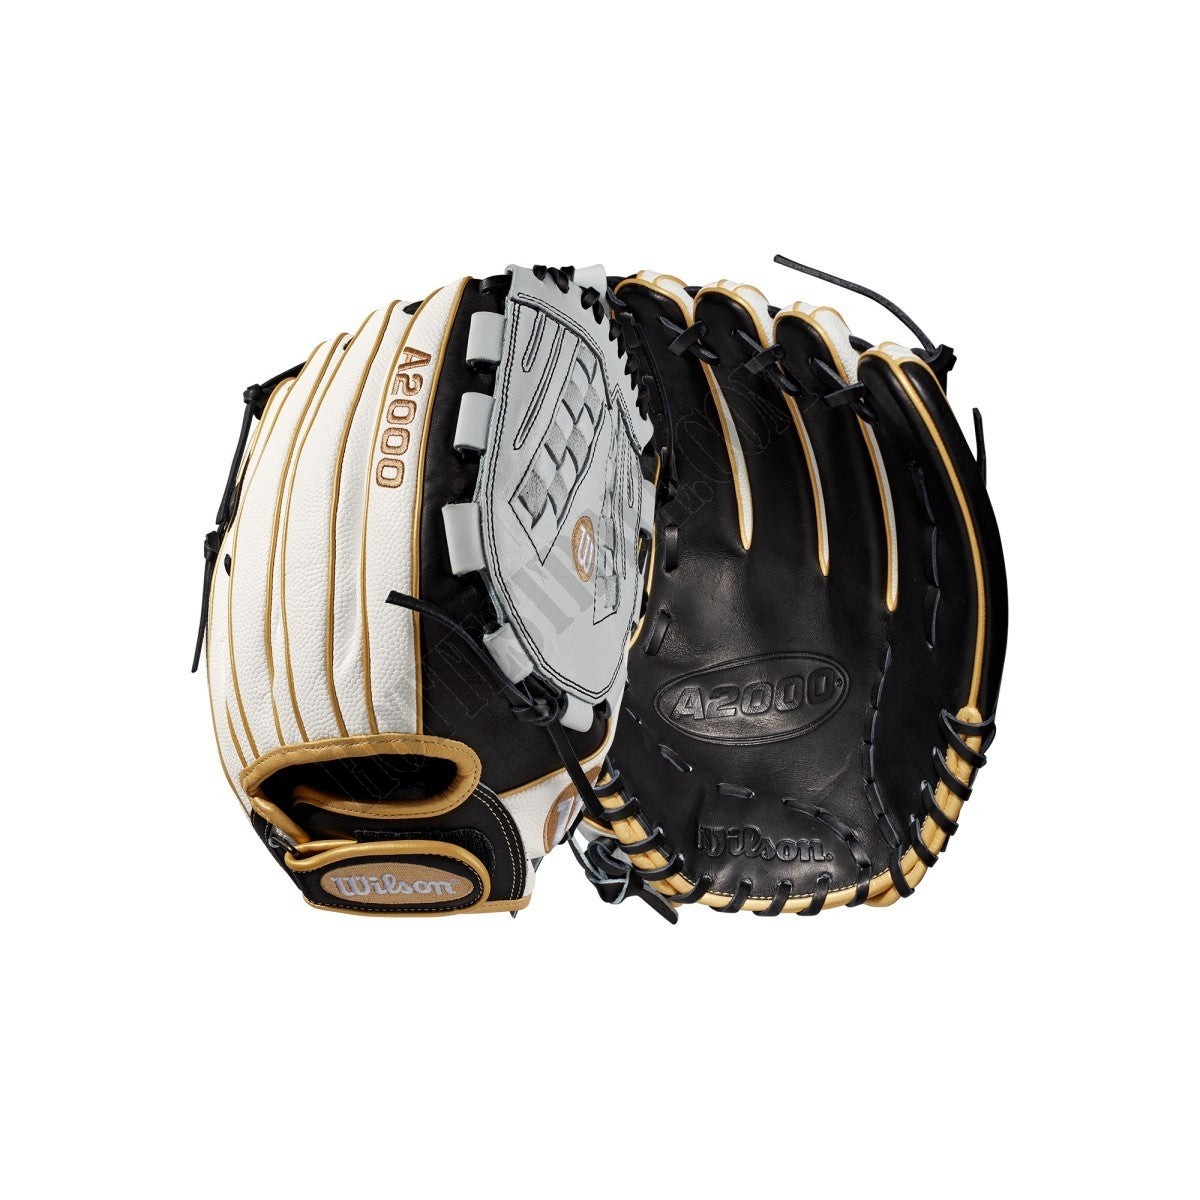 2019 A2000 V125 12.5" Outfield Fastpitch Glove ● Wilson Promotions - 2019 A2000 V125 12.5" Outfield Fastpitch Glove ● Wilson Promotions